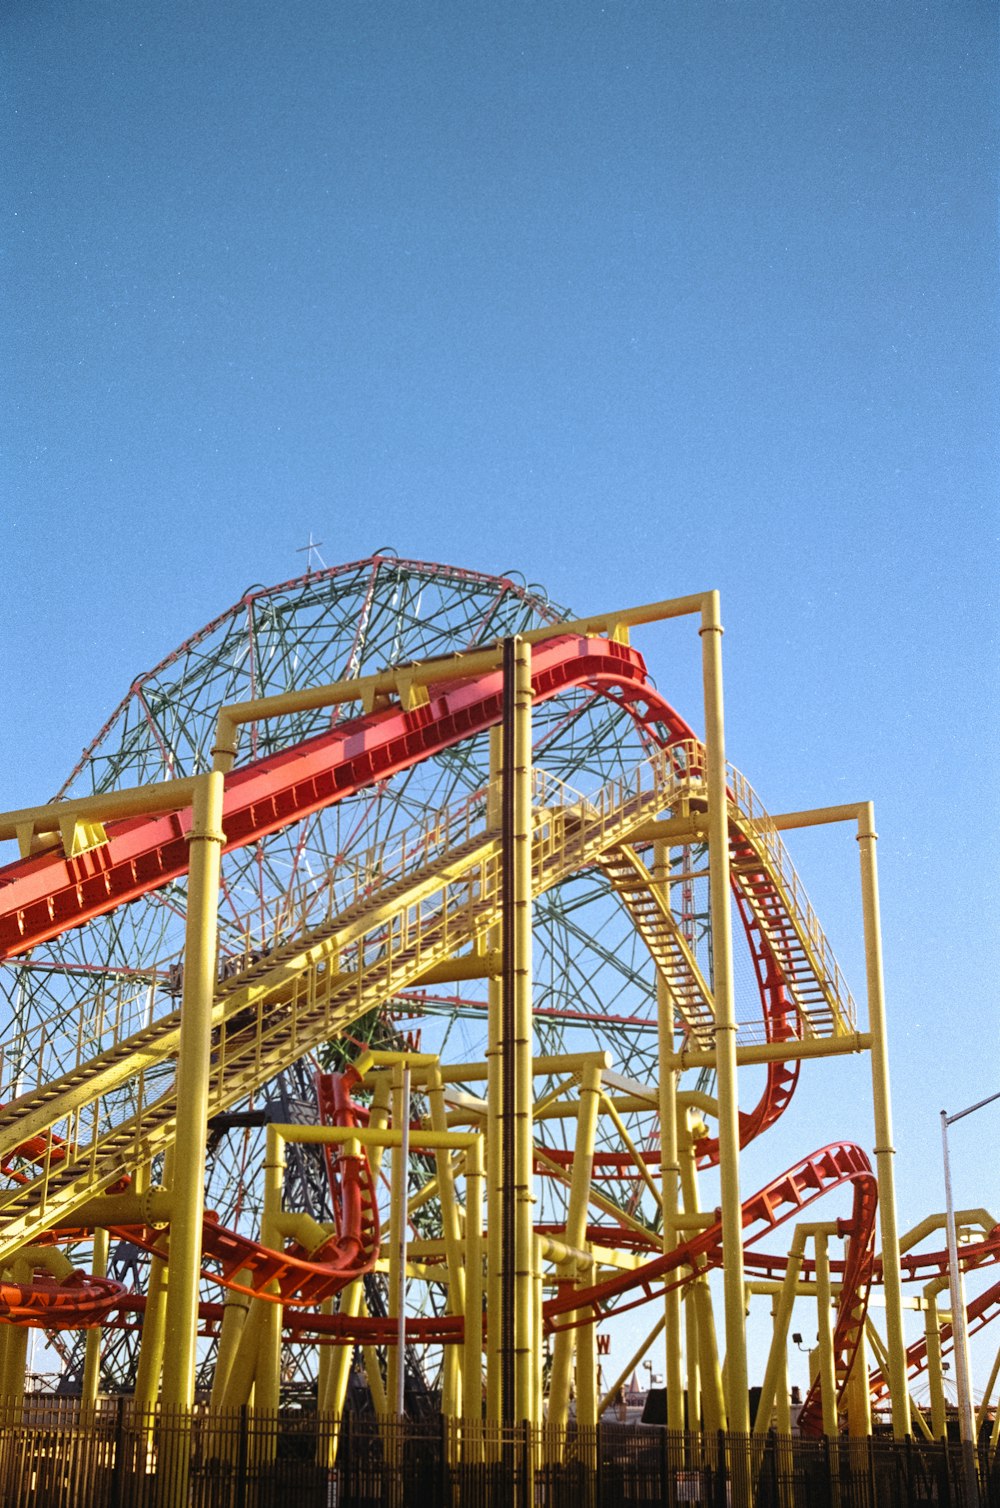 a red and yellow roller coaster at a theme park